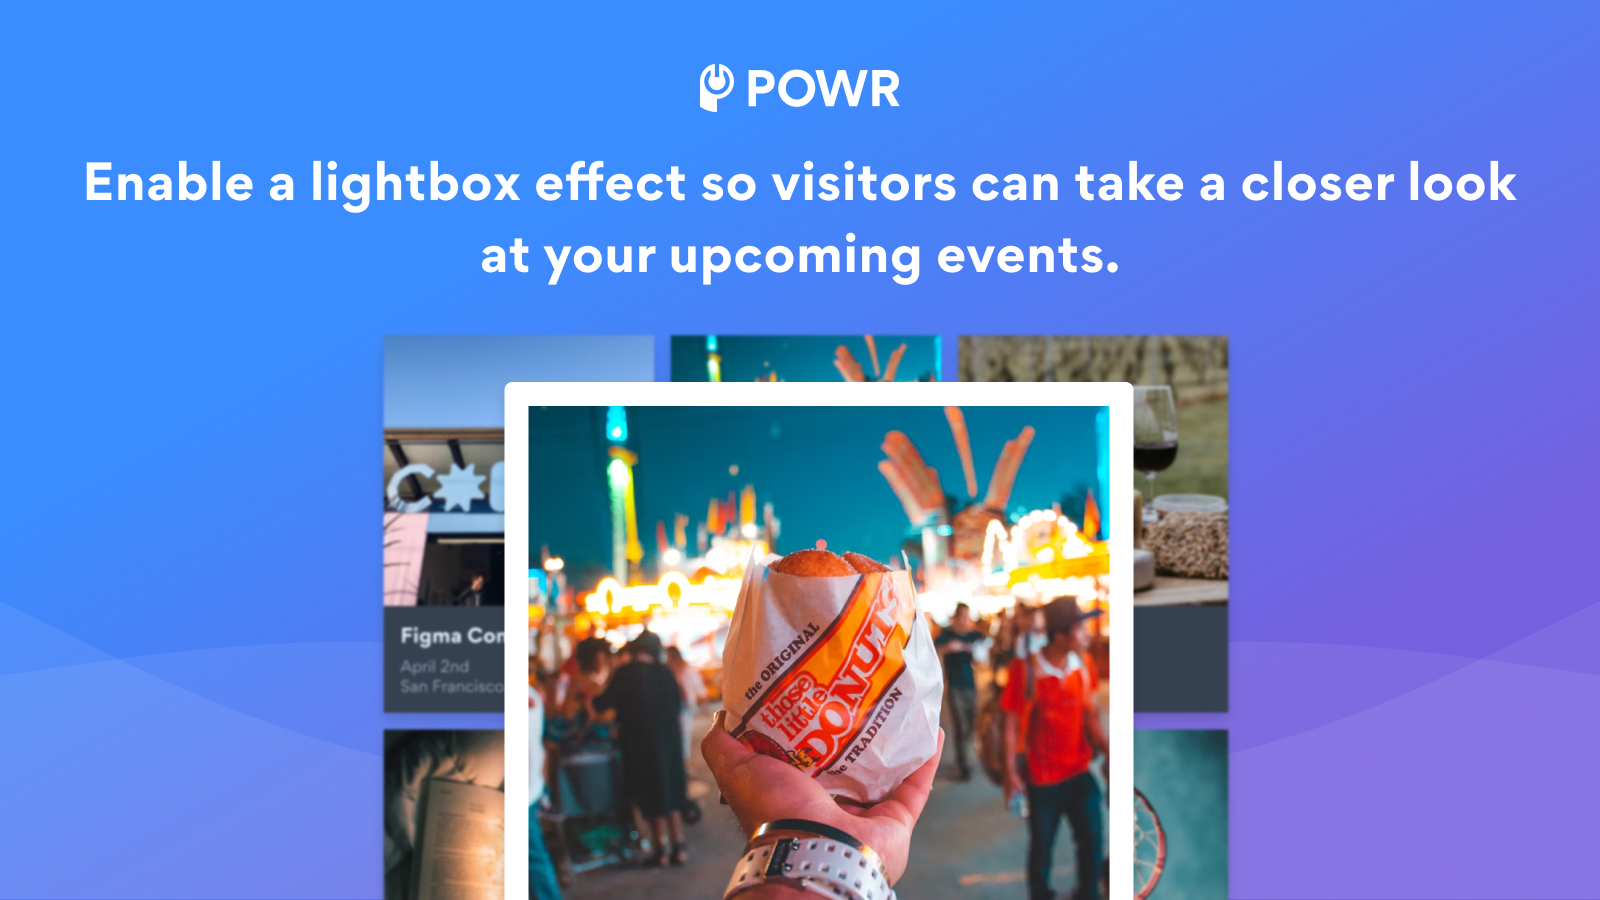 enable a lightbox effect so shoppers can get a closer look